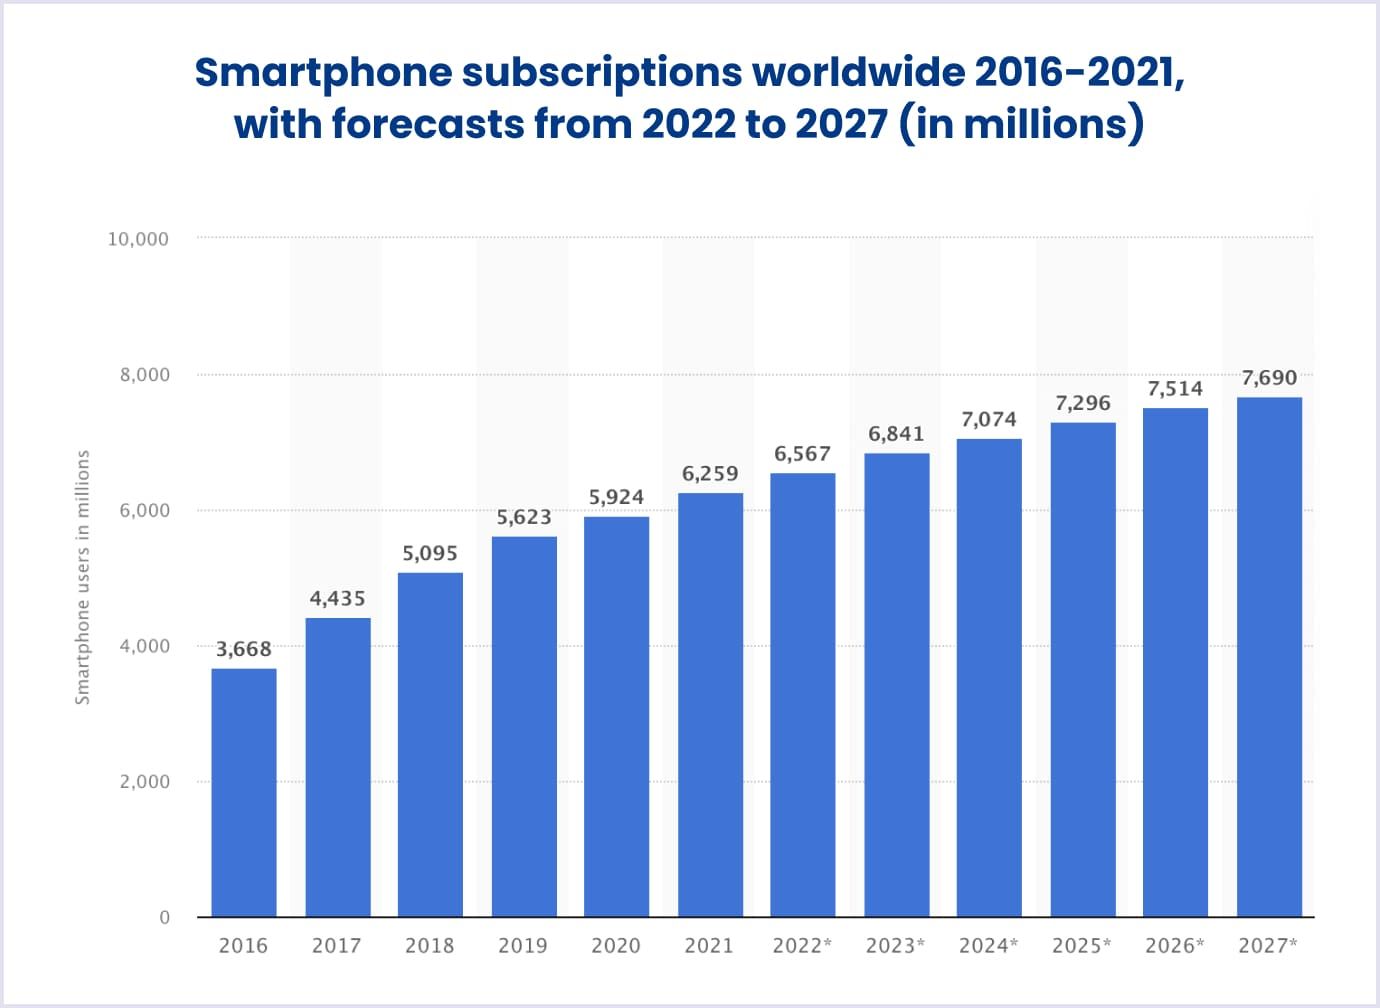 Forecasts of smartphone subscriptions worldwide from 2022 to 2027